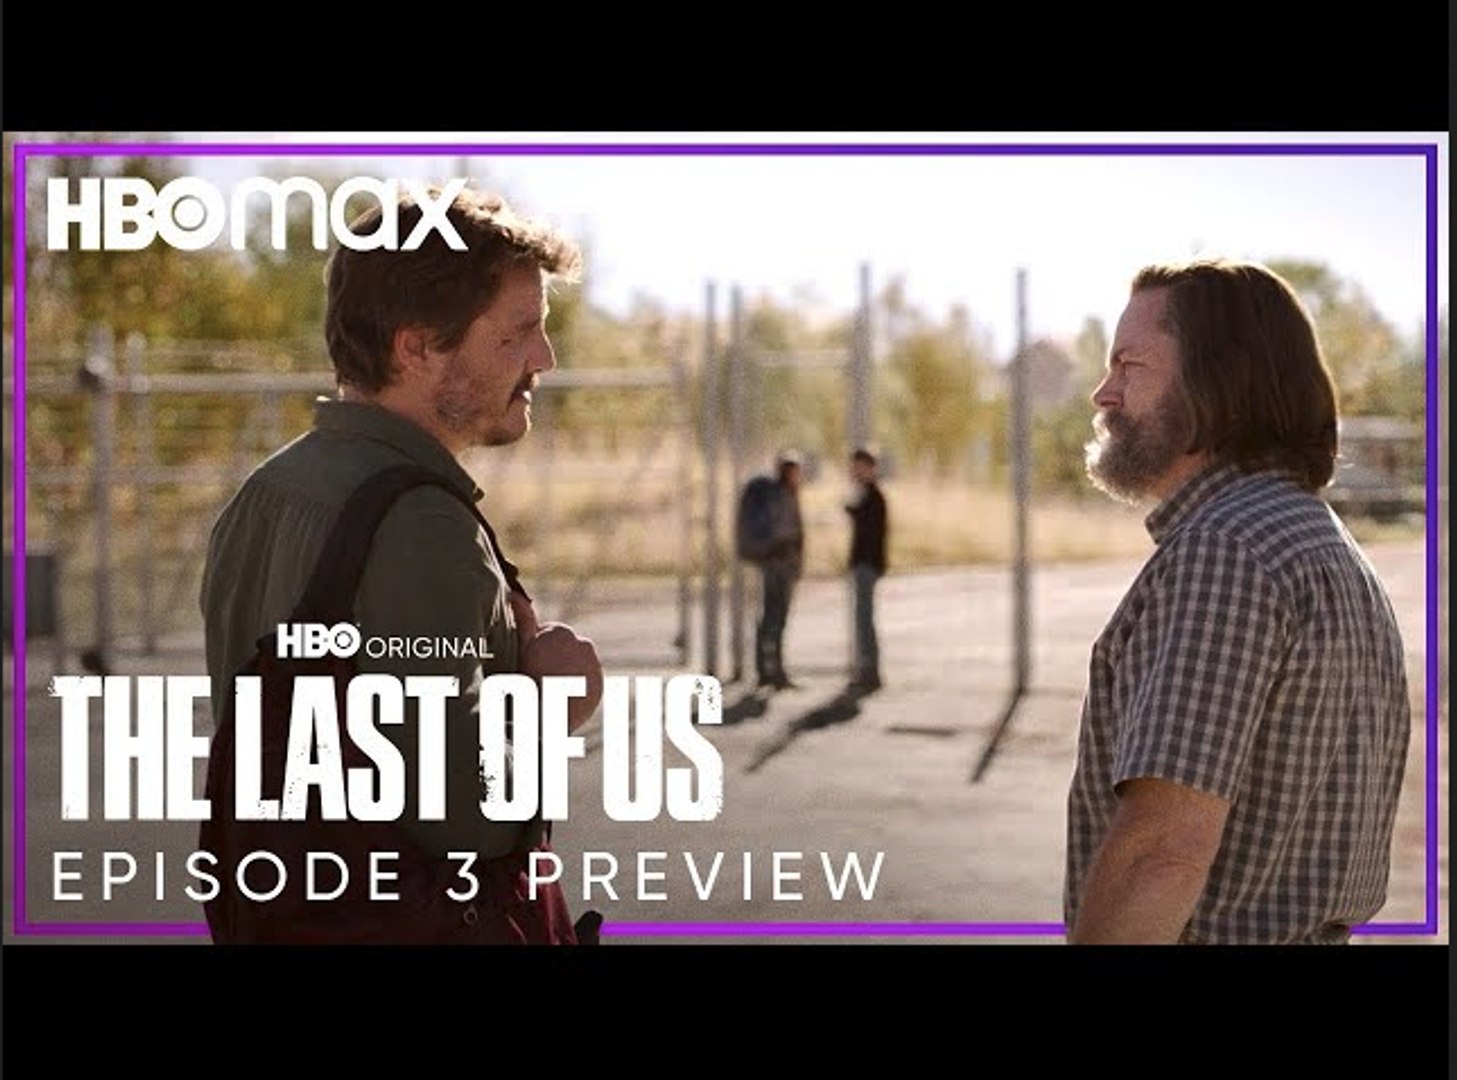 The Last of Us, EPISODE 3 TRAILER